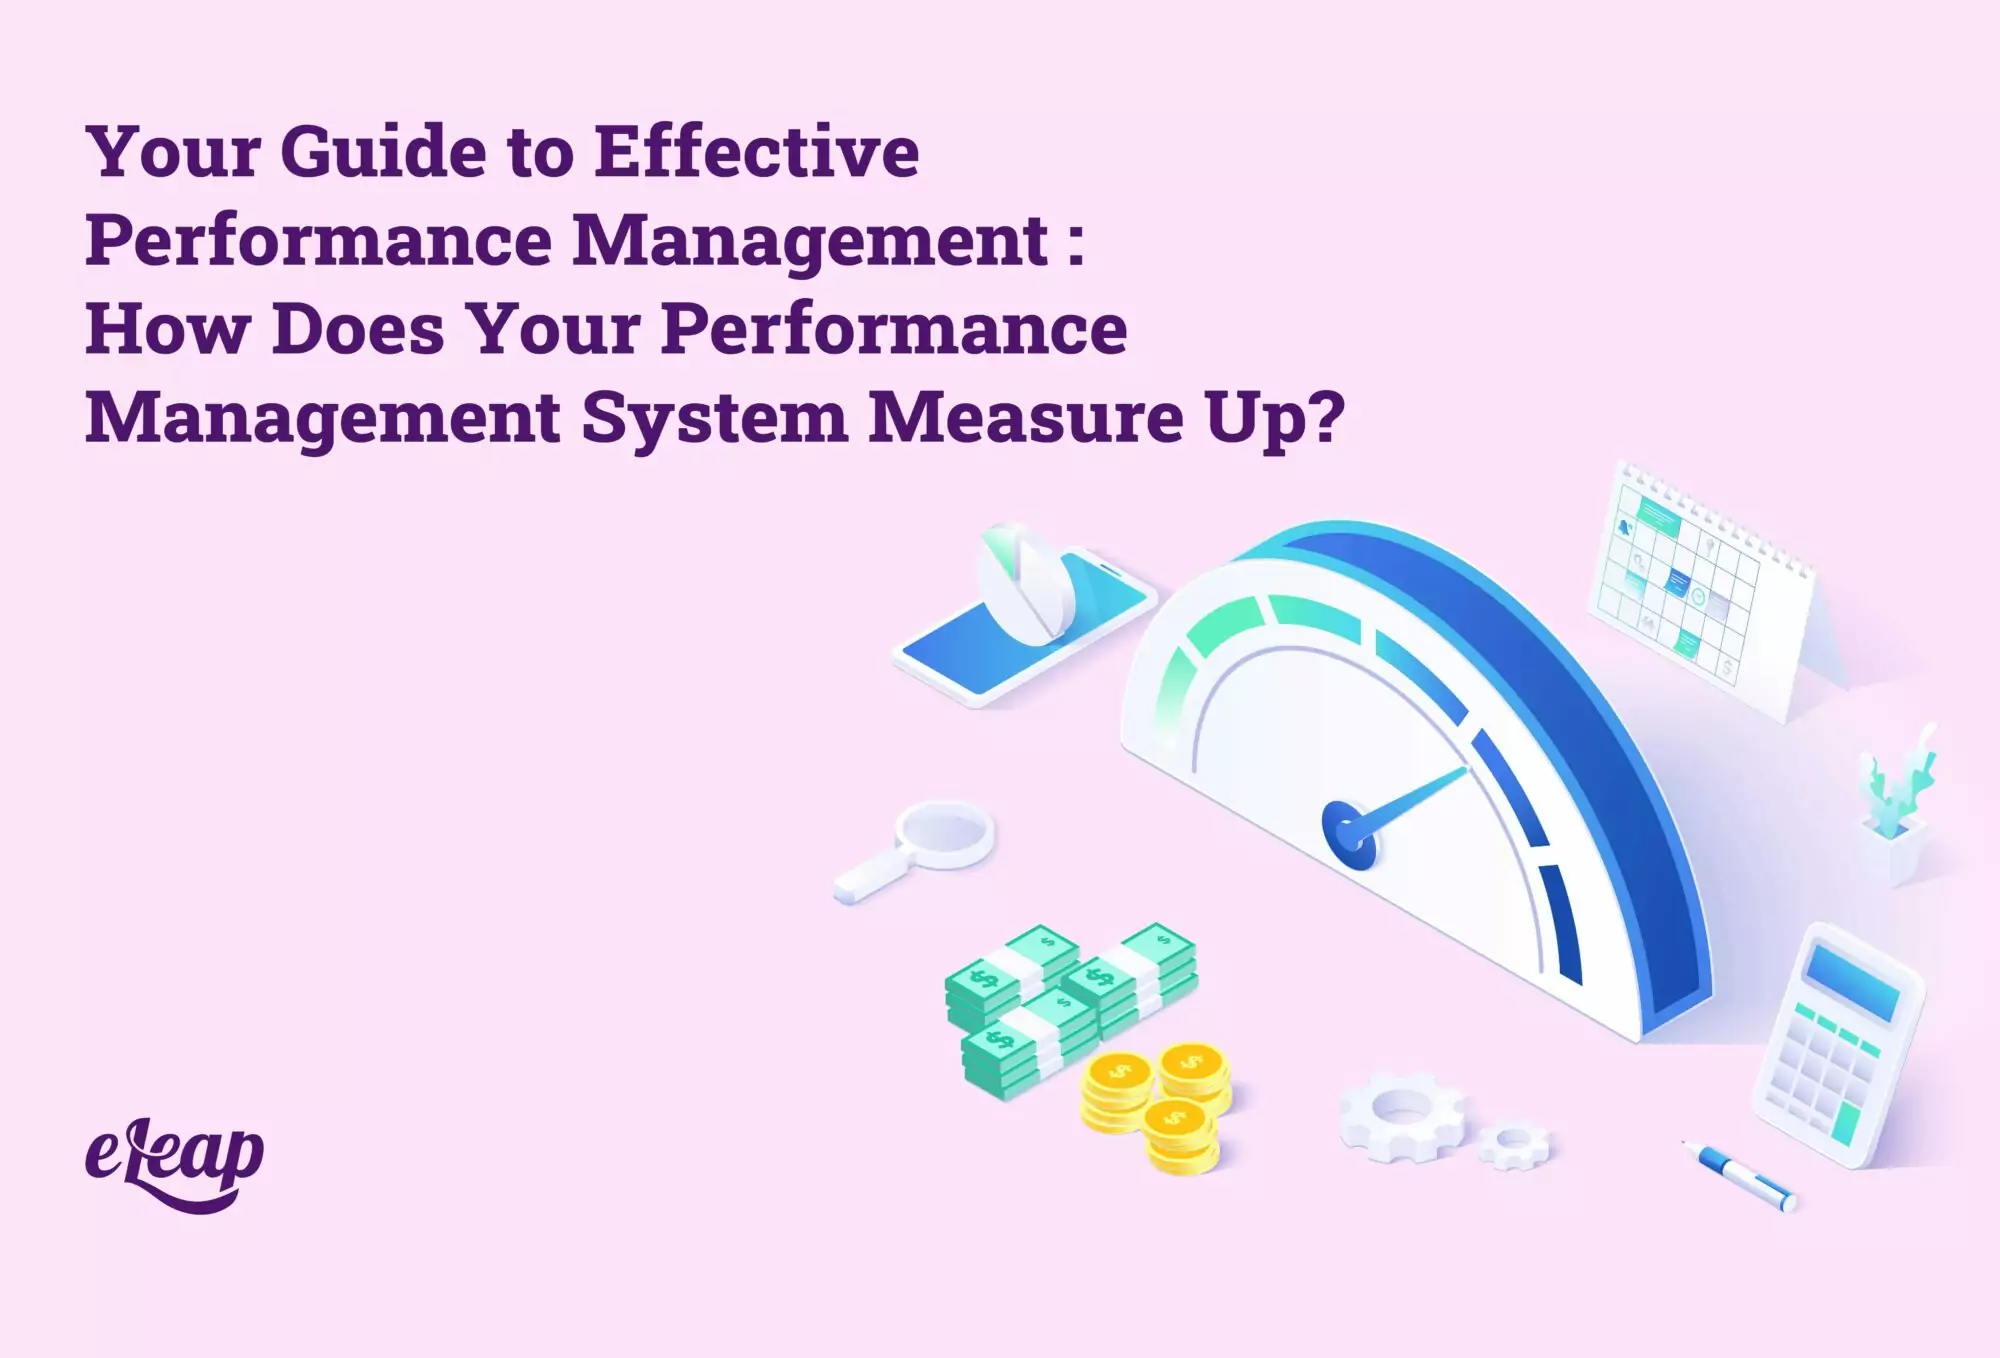 Your Guide to Effective Performance Management: How Does Your Performance Management System Measure Up?